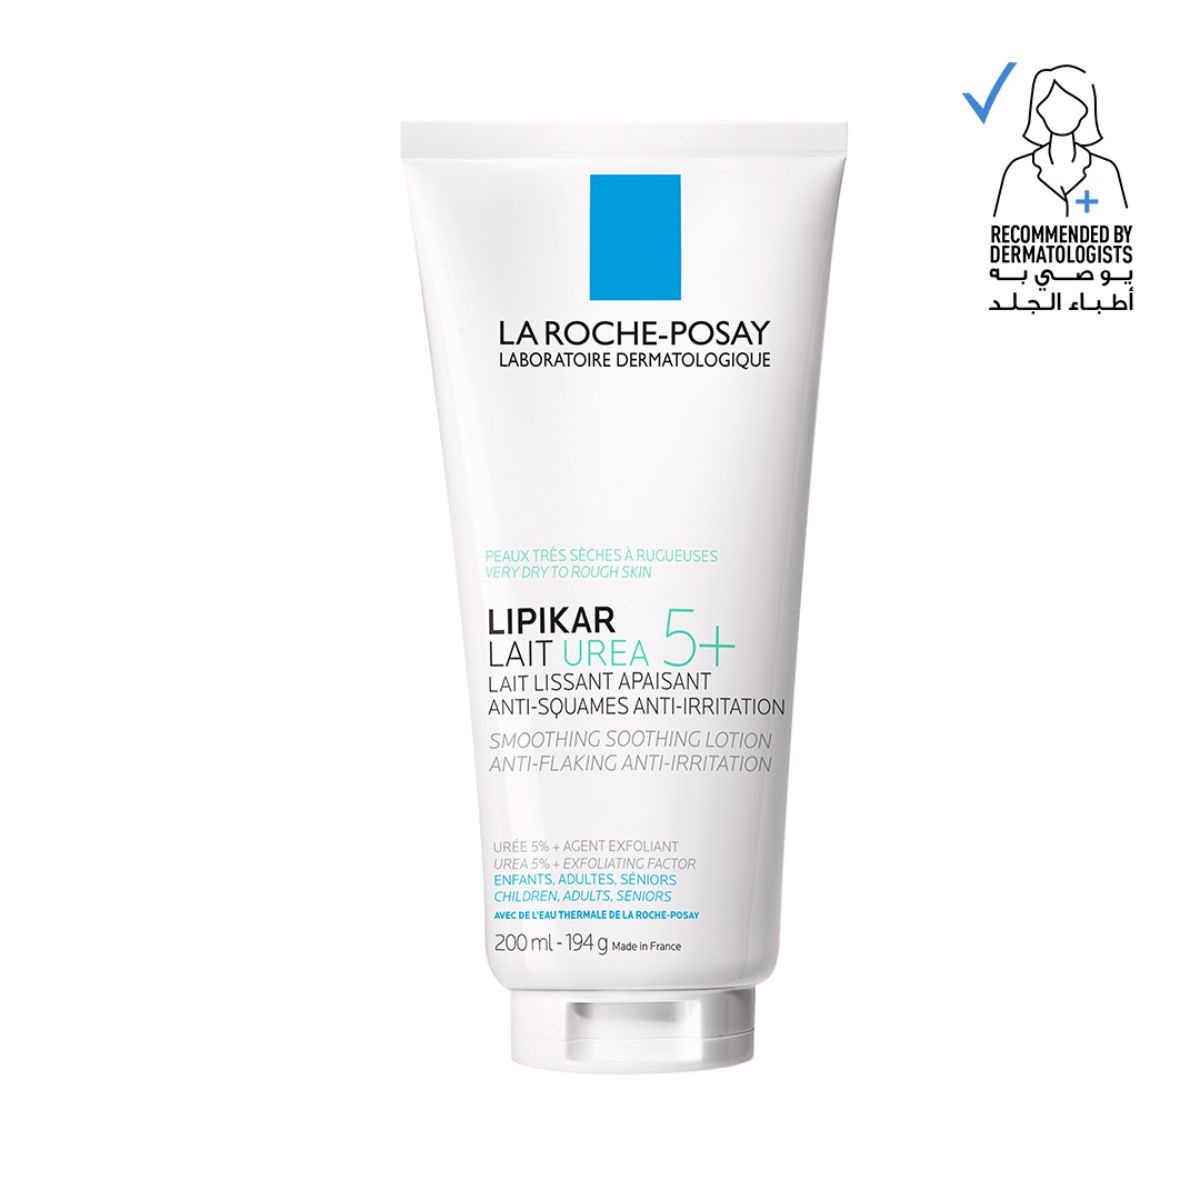 2nd Product Image for La Roche-Posay Lipikar Lait Urea 5% Soothing Body Lotion For Rough Skin 200ml